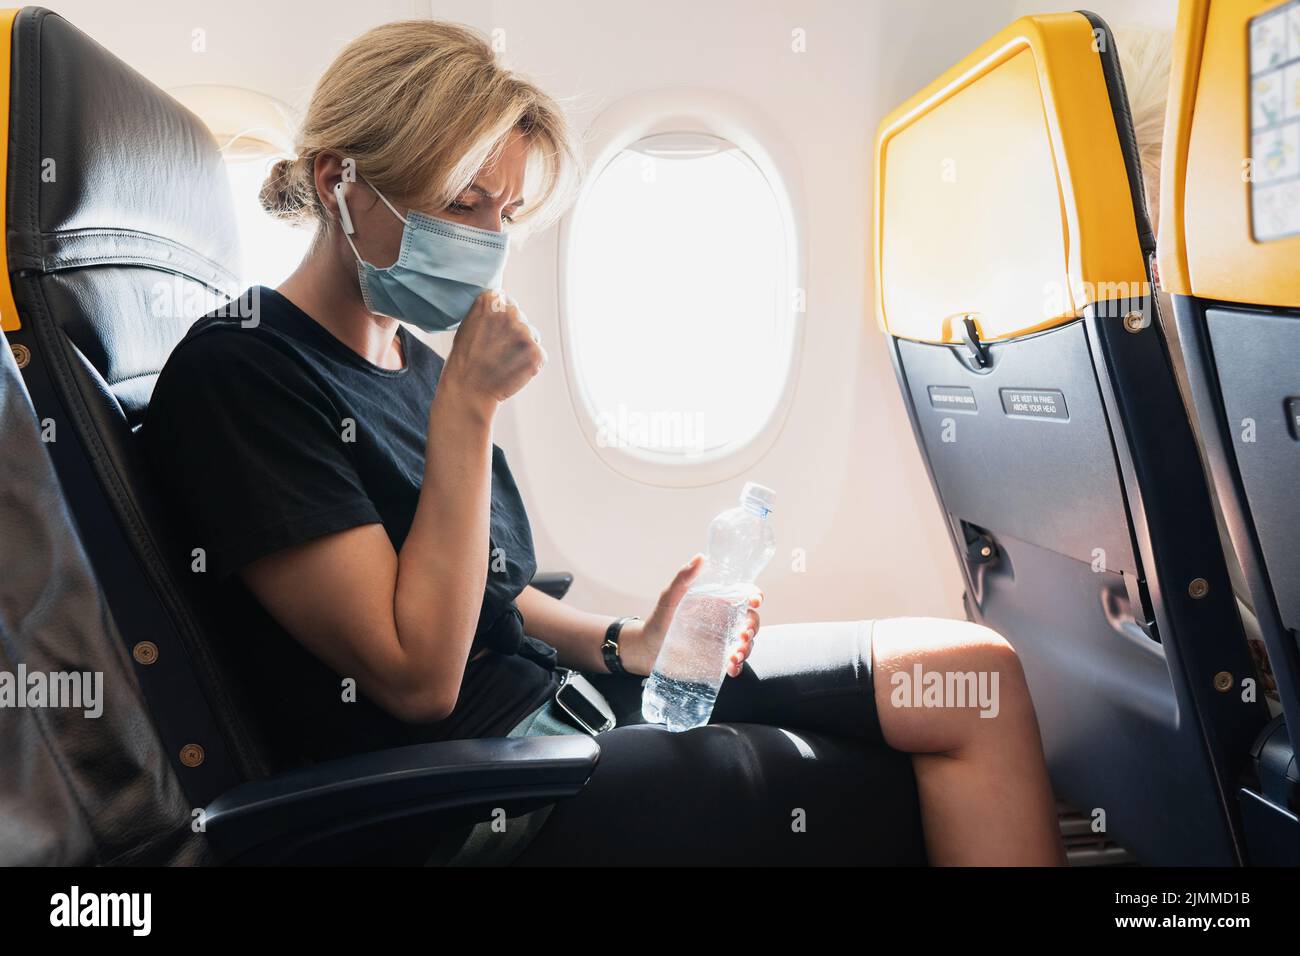 Woman wearing prevention mask during a flight inside an airplane Stock Photo